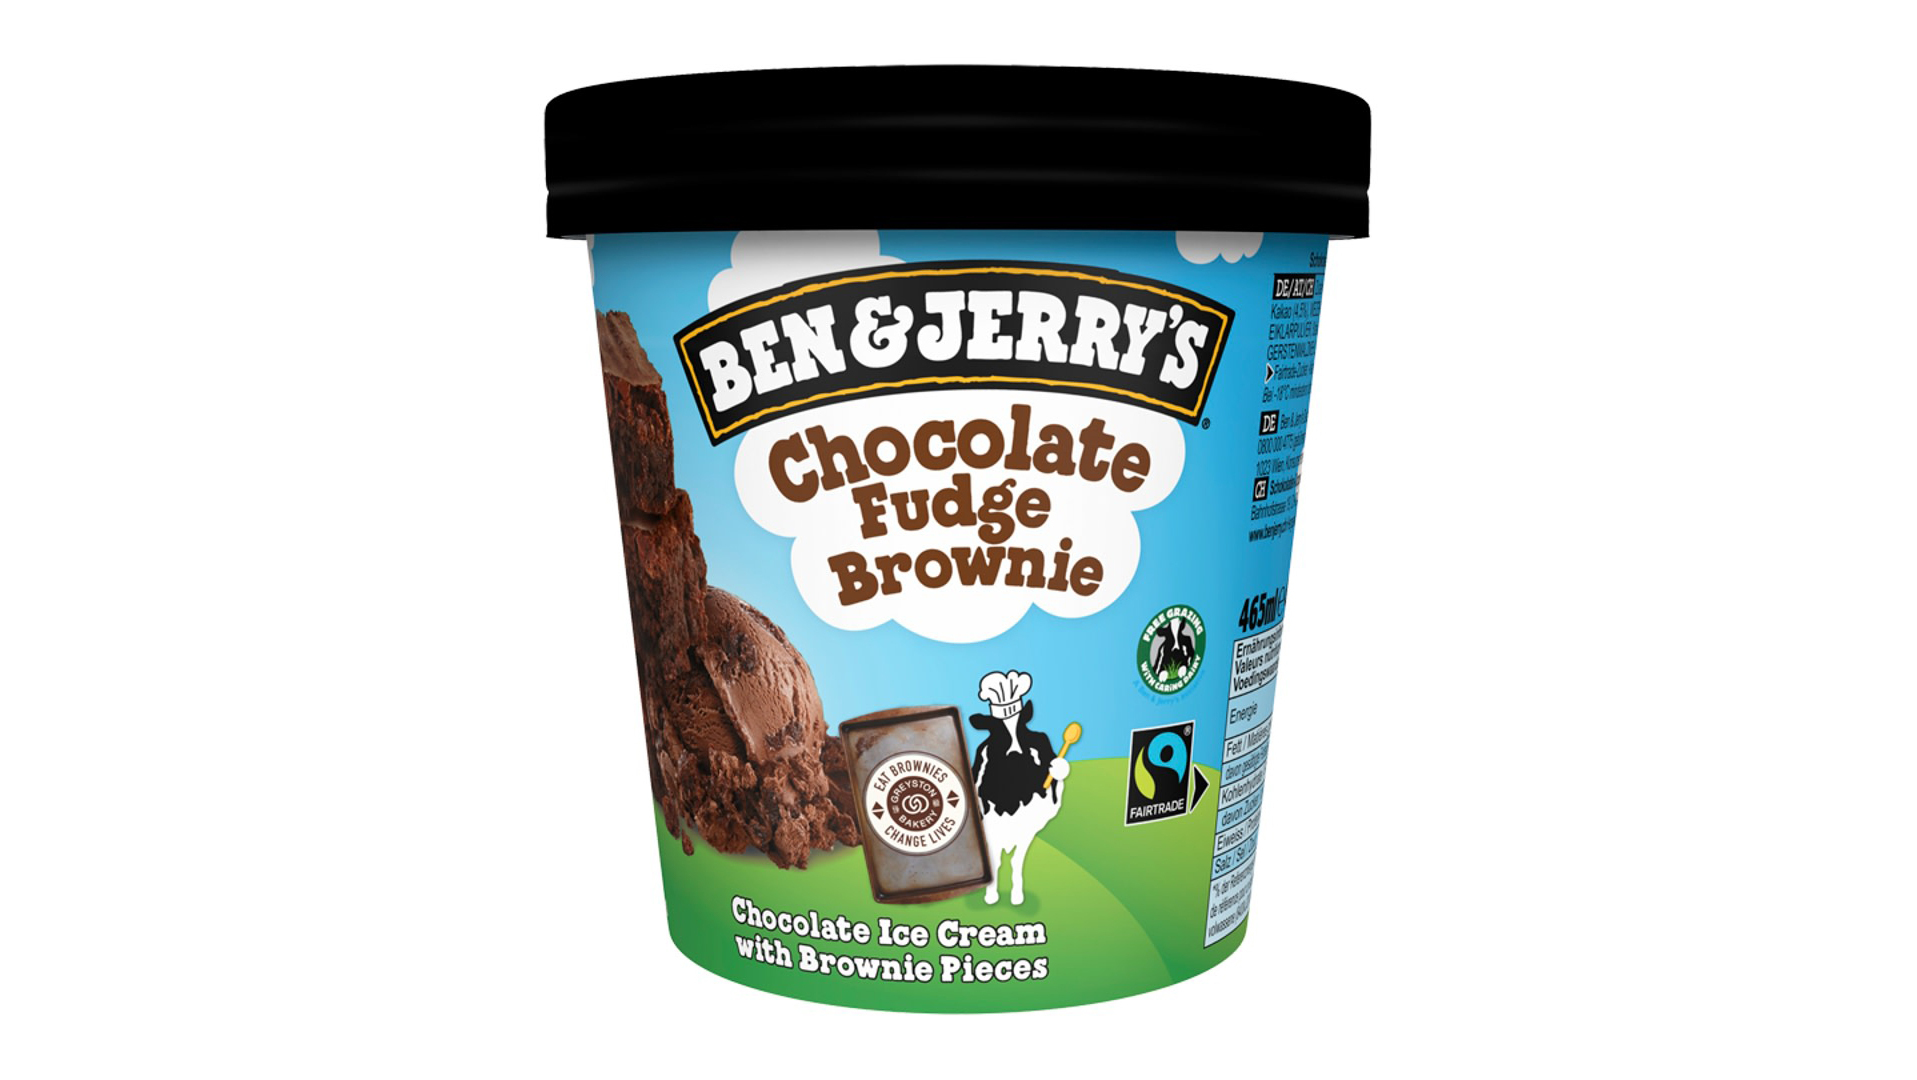 Ben & Jerry's Chocolate Fudge Brownie 500ml - Best Delivery in Stratford Marsh E15